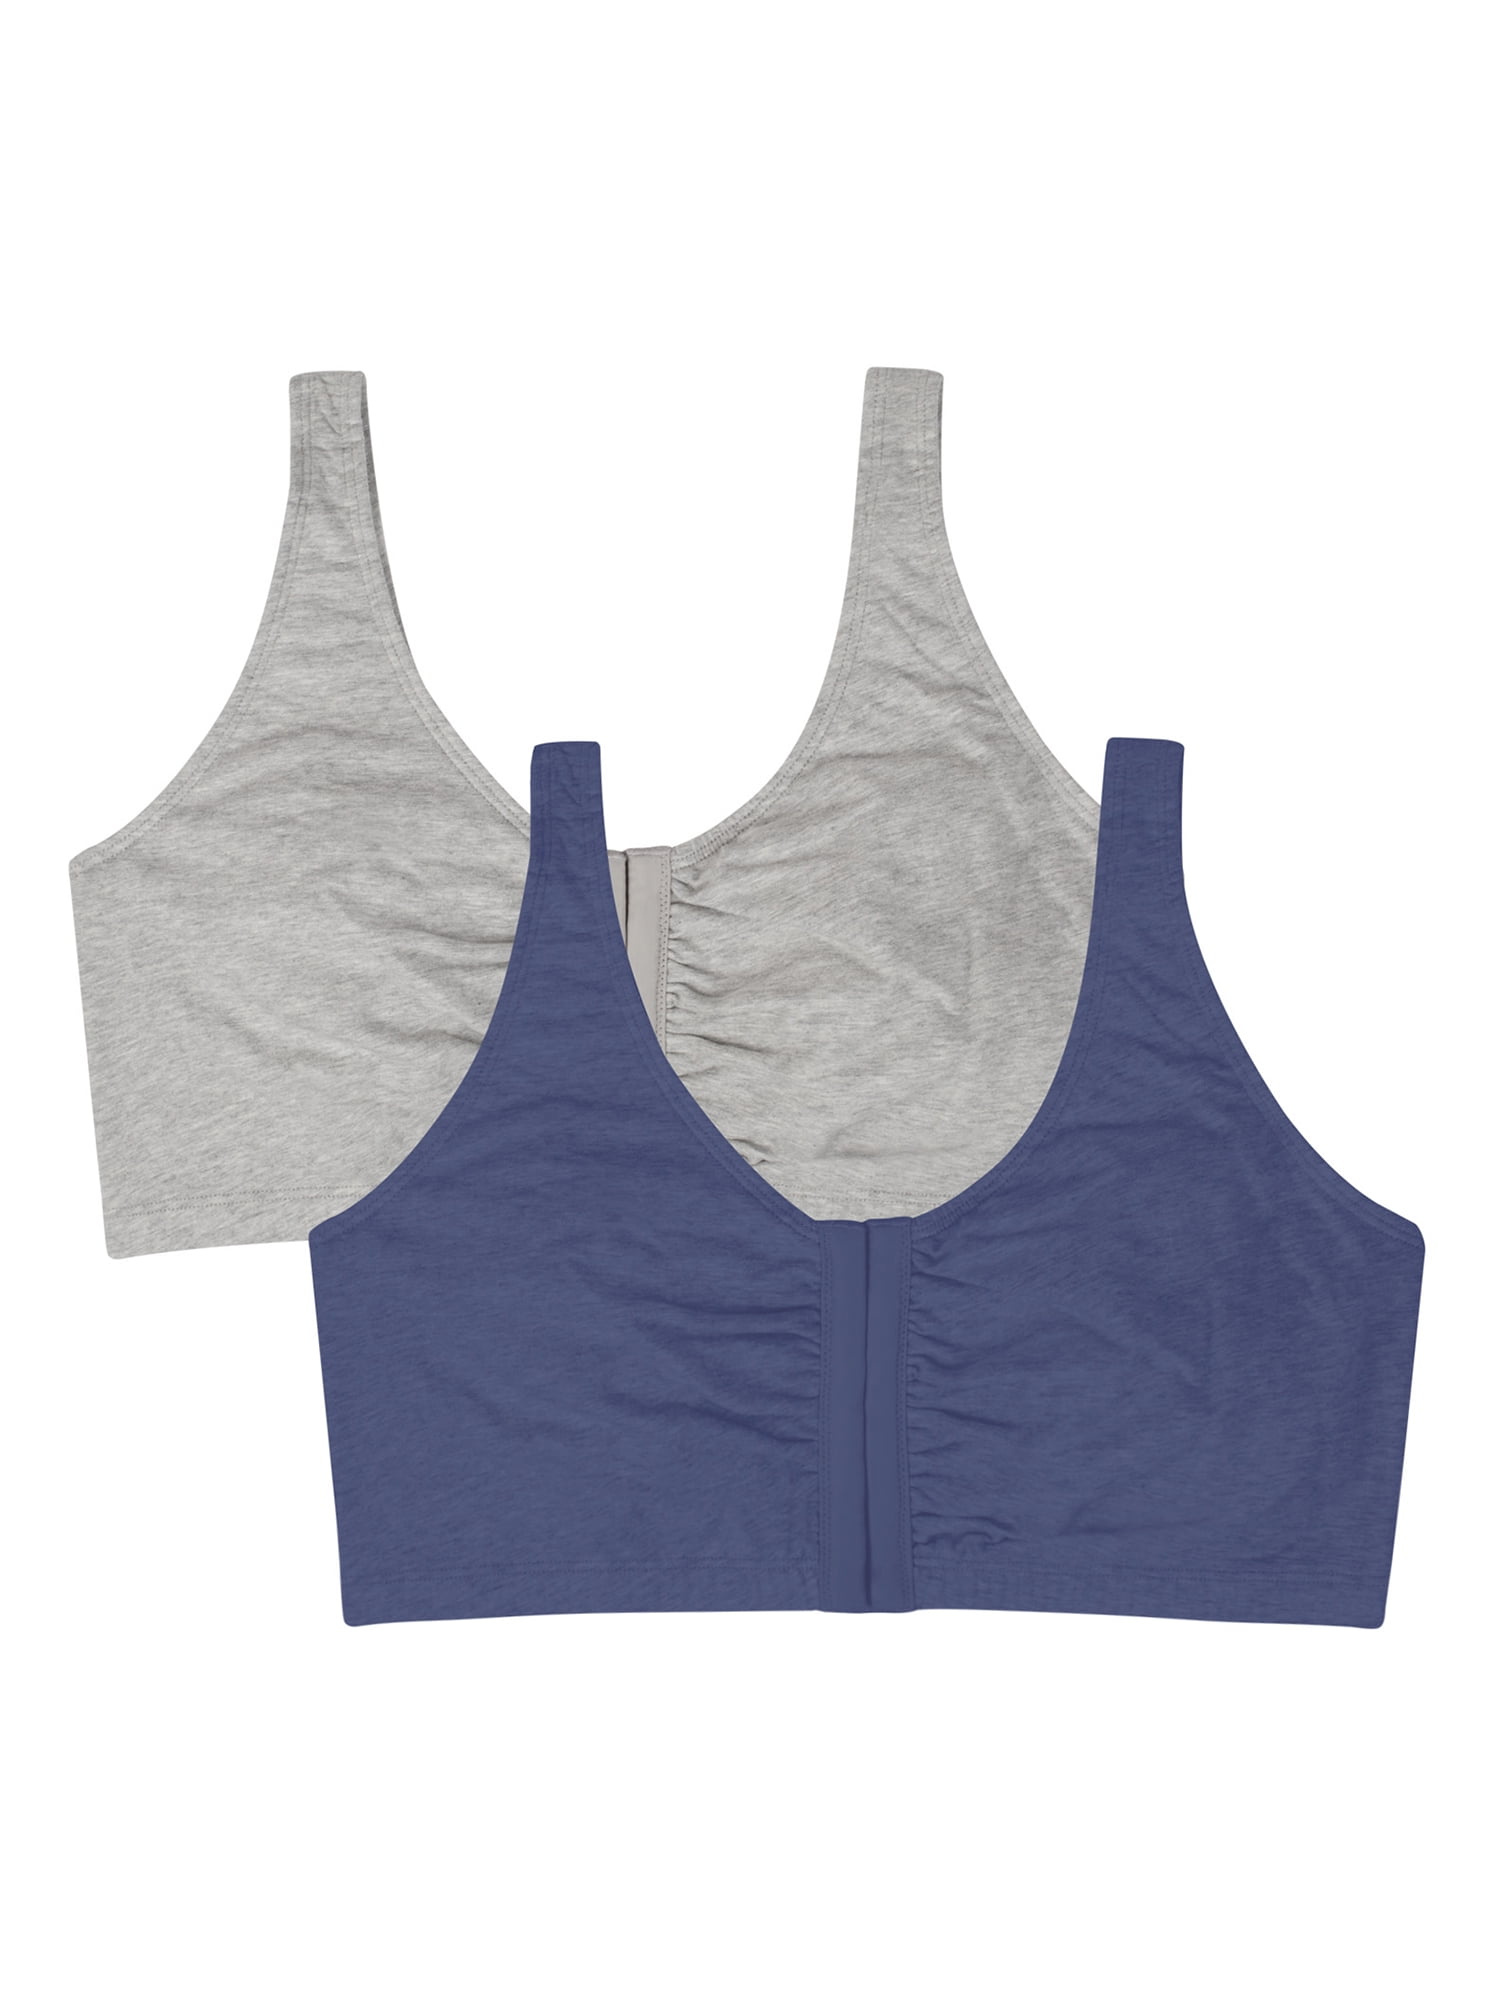 Fruit of The Loom Women's Comfort Front Close Cotton Sports Bra